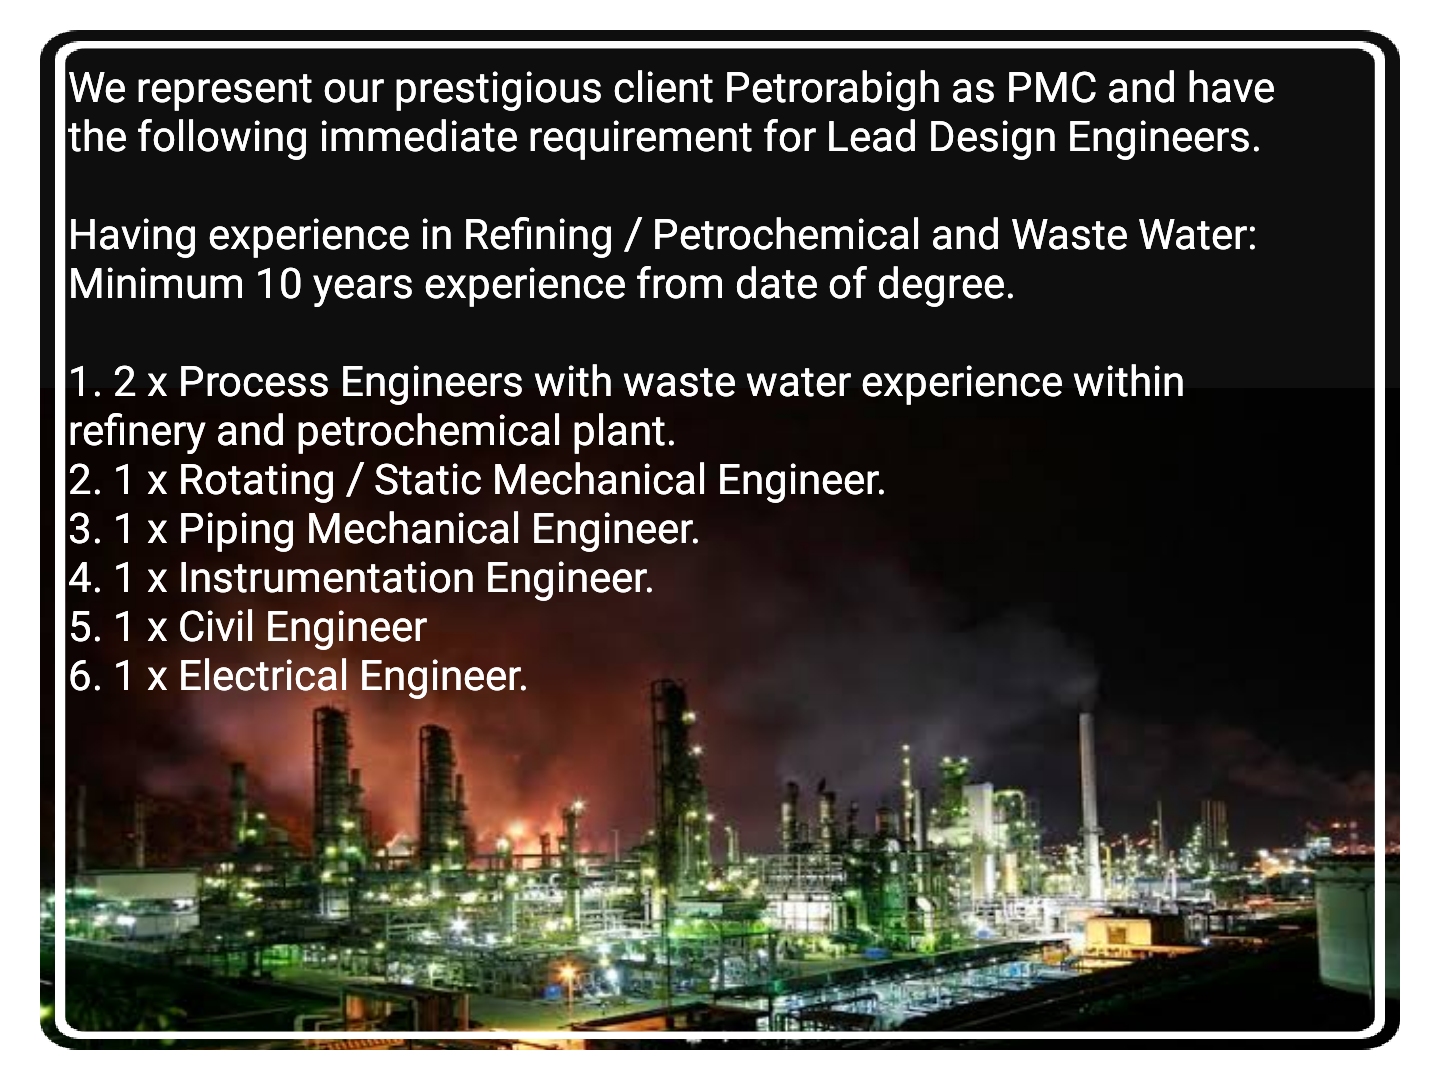 Process, Piping, Instrument, Civil & Electrical Engineer Jobs